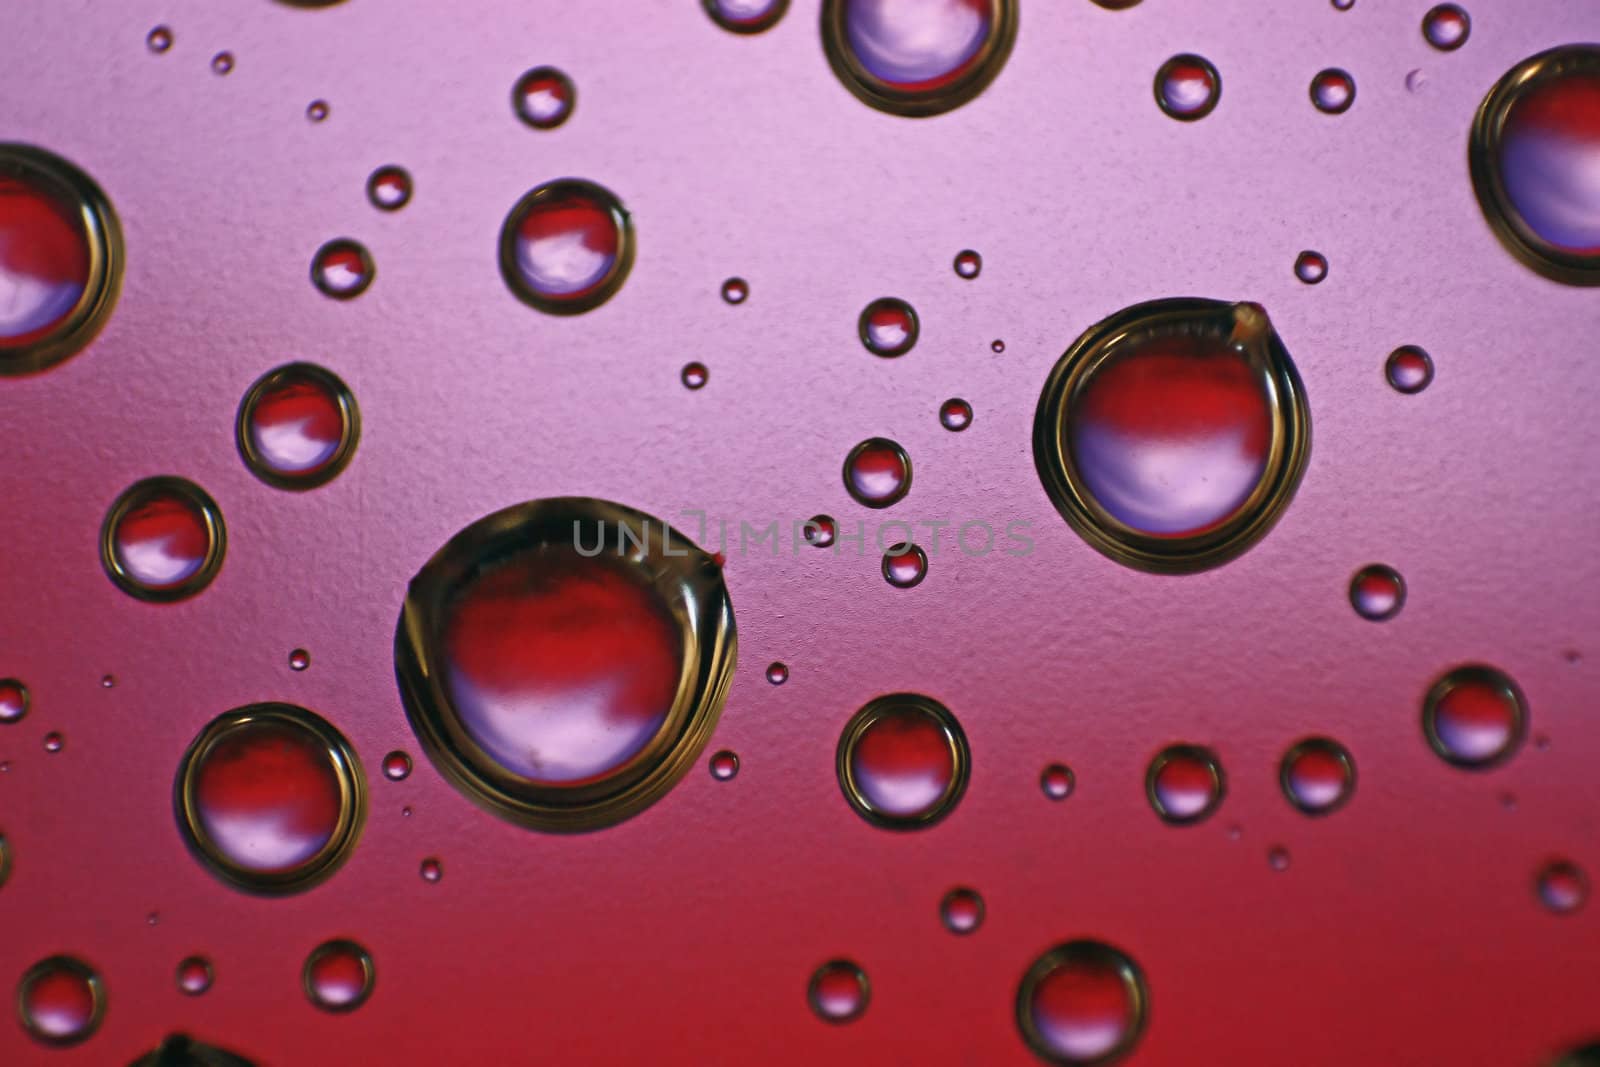 We see an unusual background. These are multi-colored drops of water on a surface.